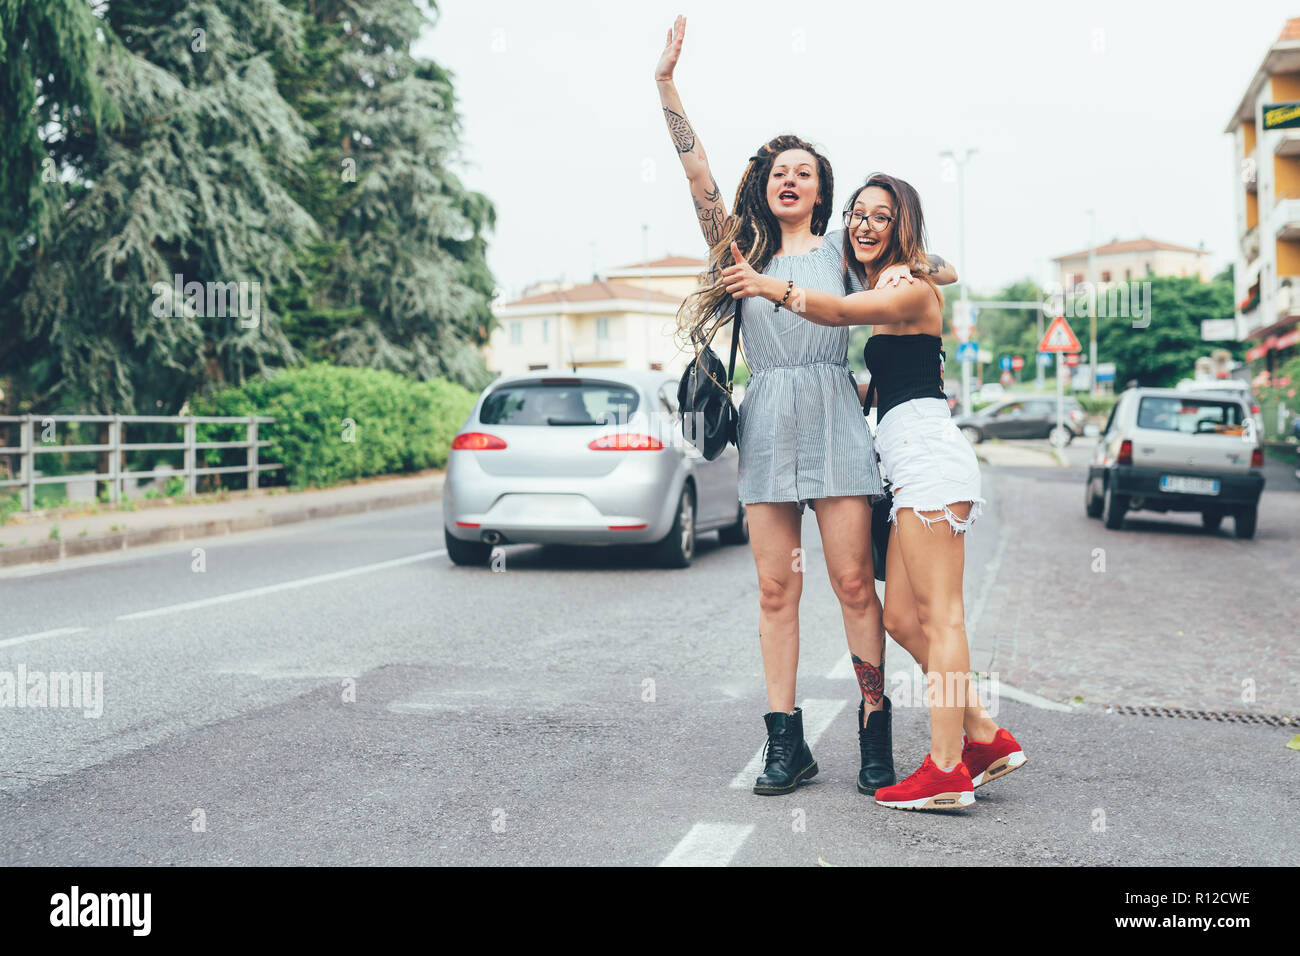 Girlfriends hailing cab in middle of road Stock Photo